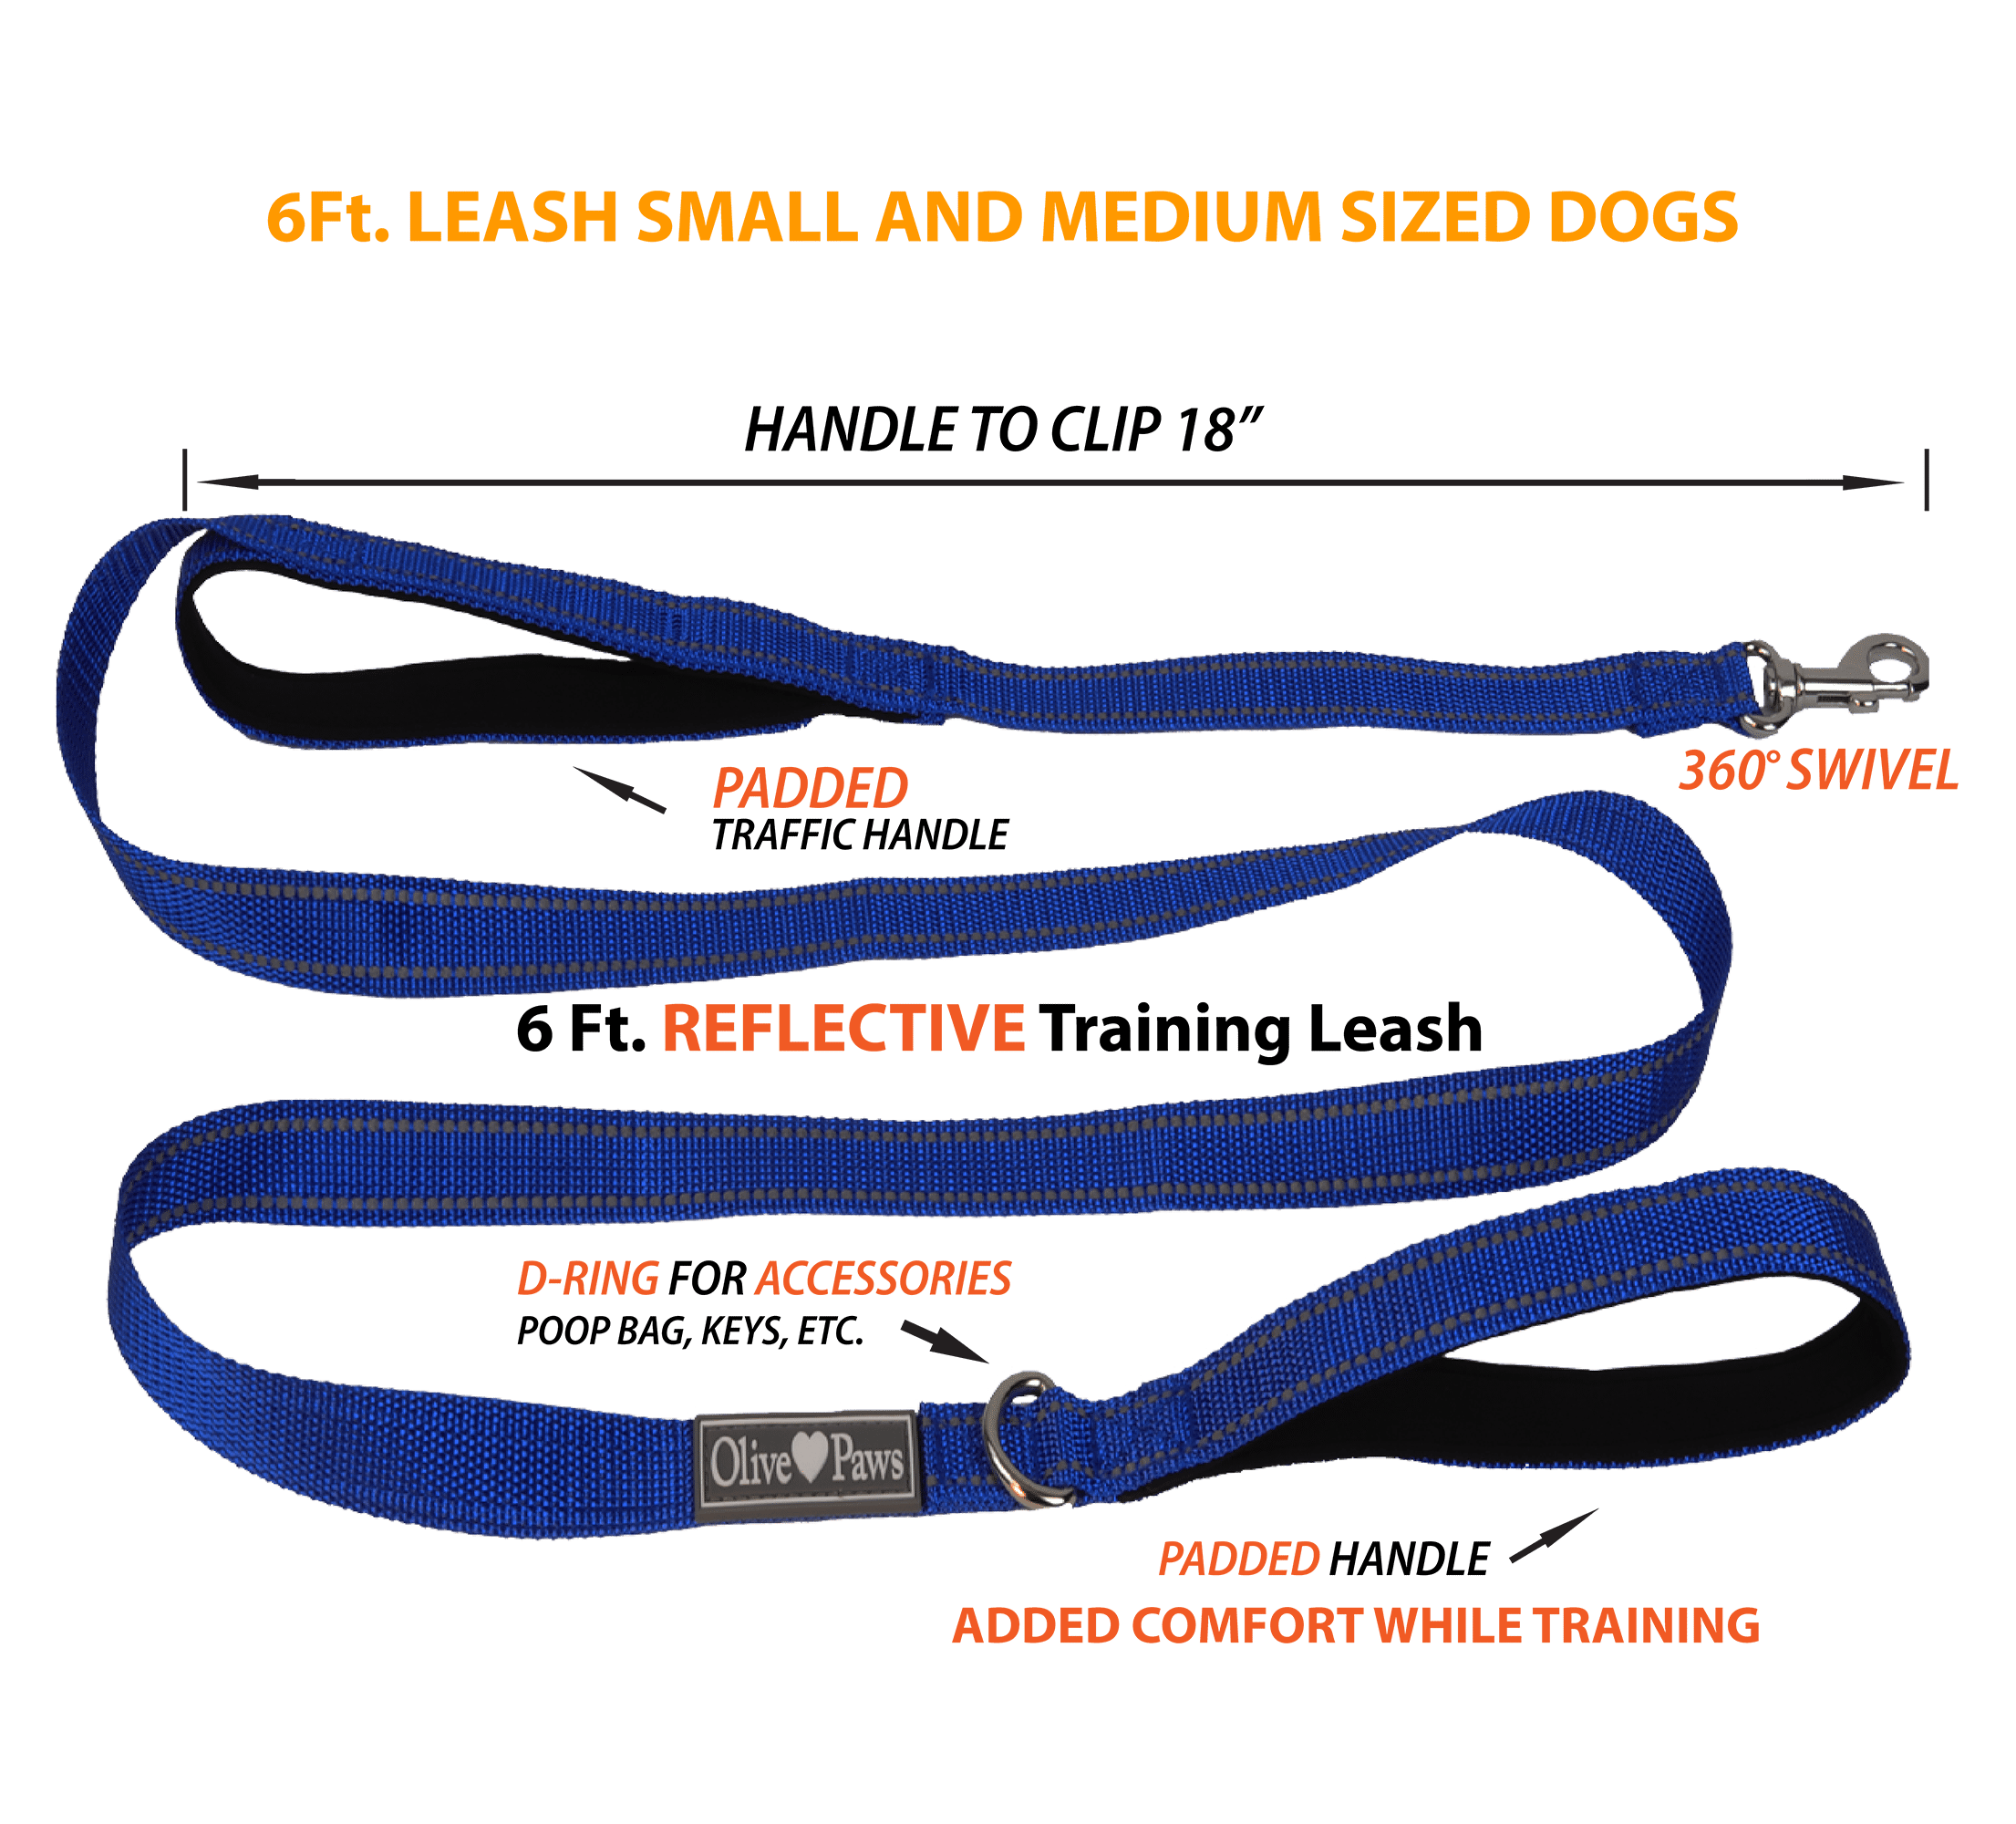  Swift Paws Nylon Line - for Dogs - Accessory for Home Lure  Course - High Visibility Line - Strong Braided Nylon - Non-Toxic Color -  Provides Exercise and Stimulation 